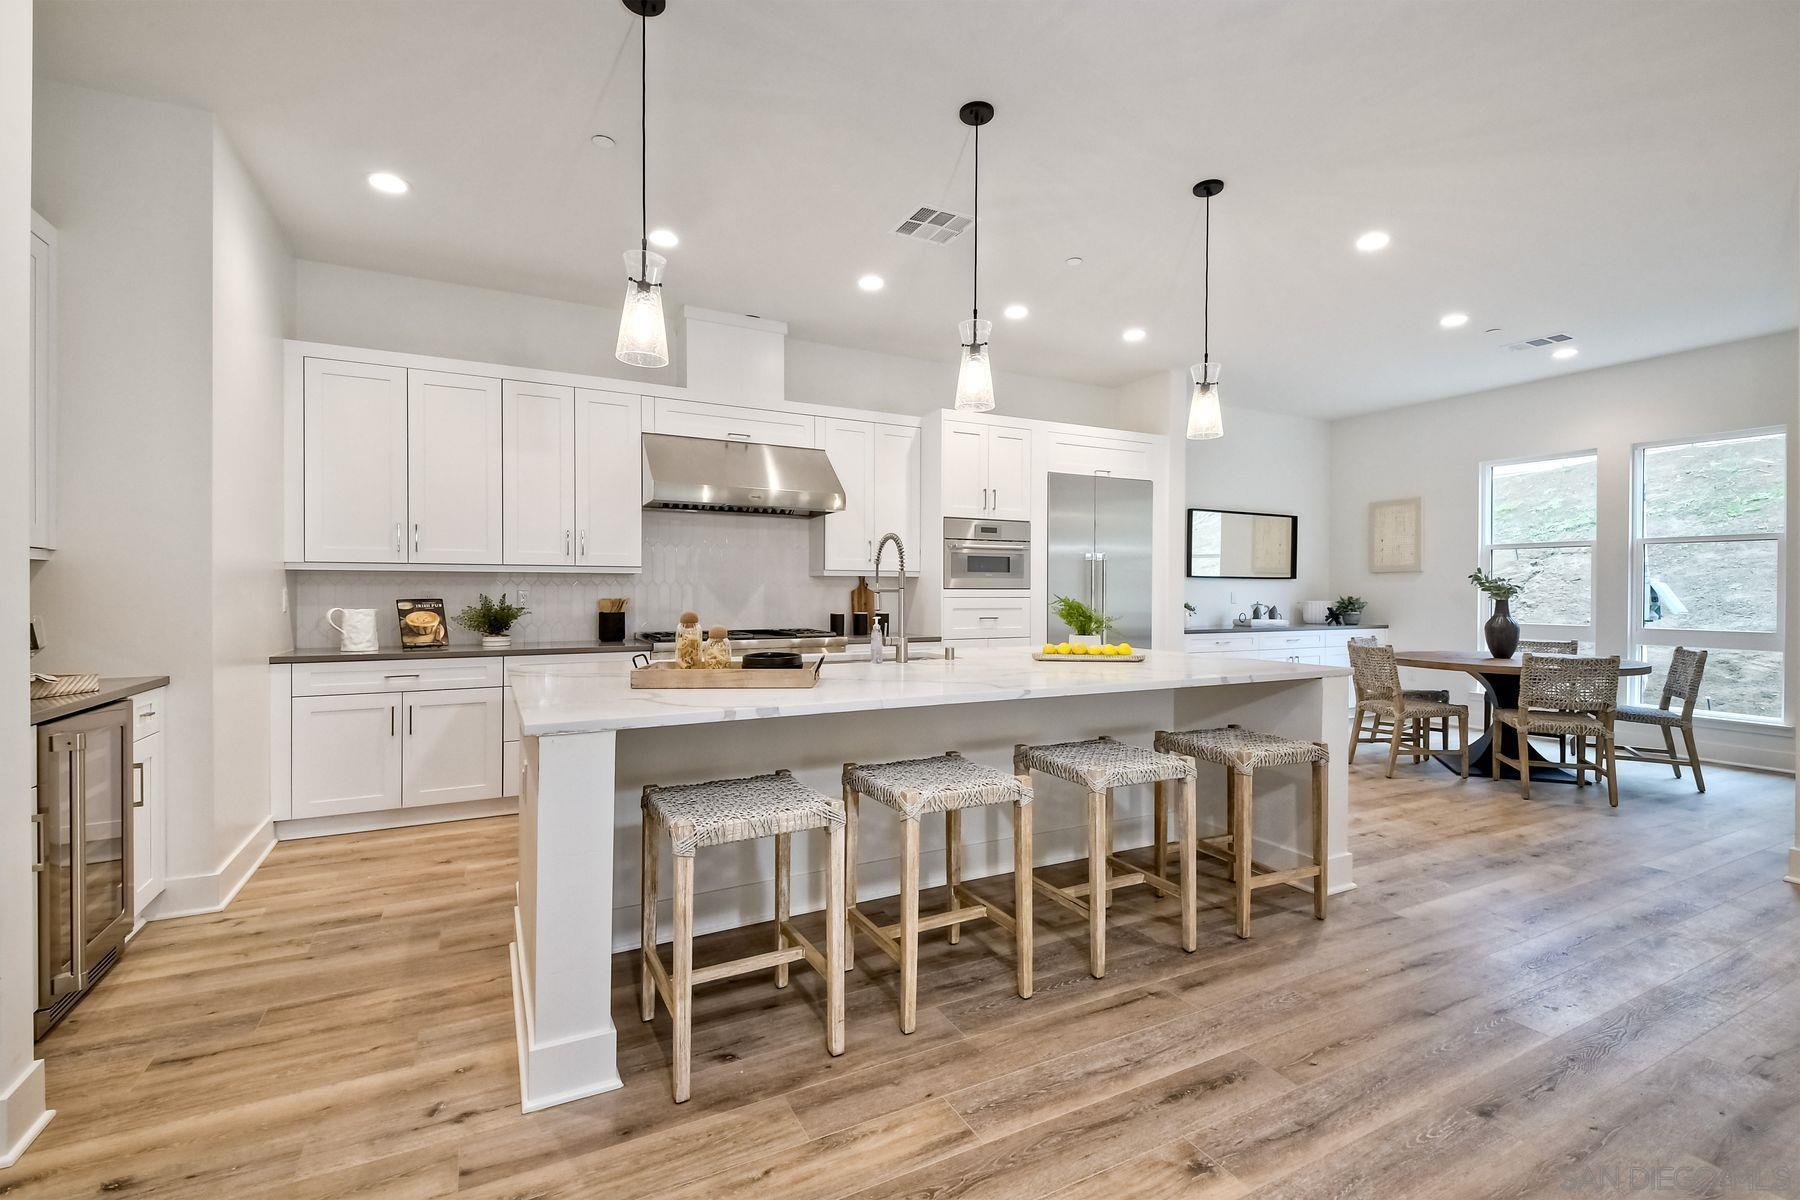 a kitchen with stainless steel appliances kitchen island granite countertop a wooden table chairs and white cabinets